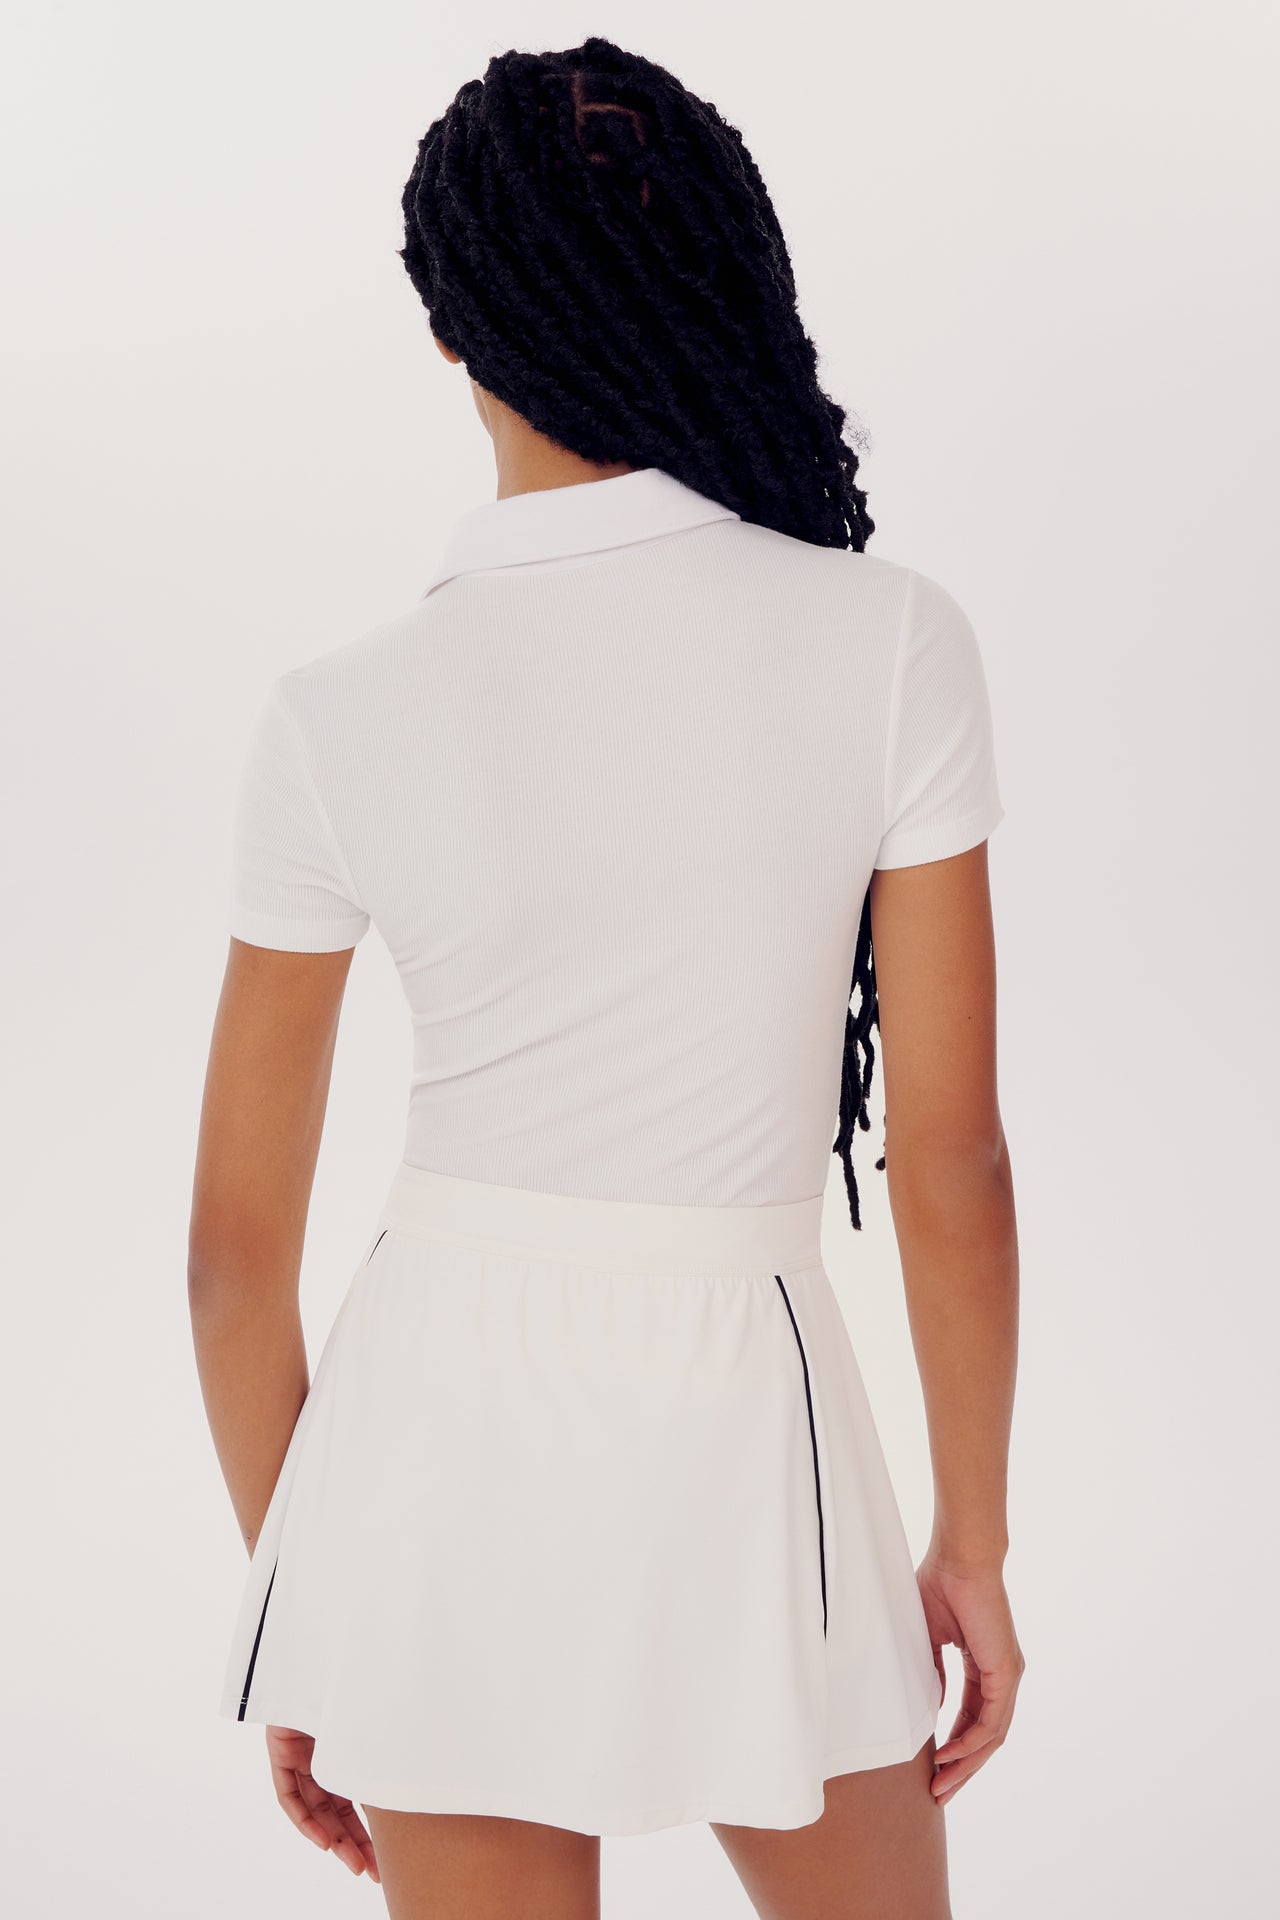 A woman facing away, wearing a SPLITS59 Talia Rib Polo - White and pleated skirt, with braided hair hanging down her back, prepared for a yoga session.